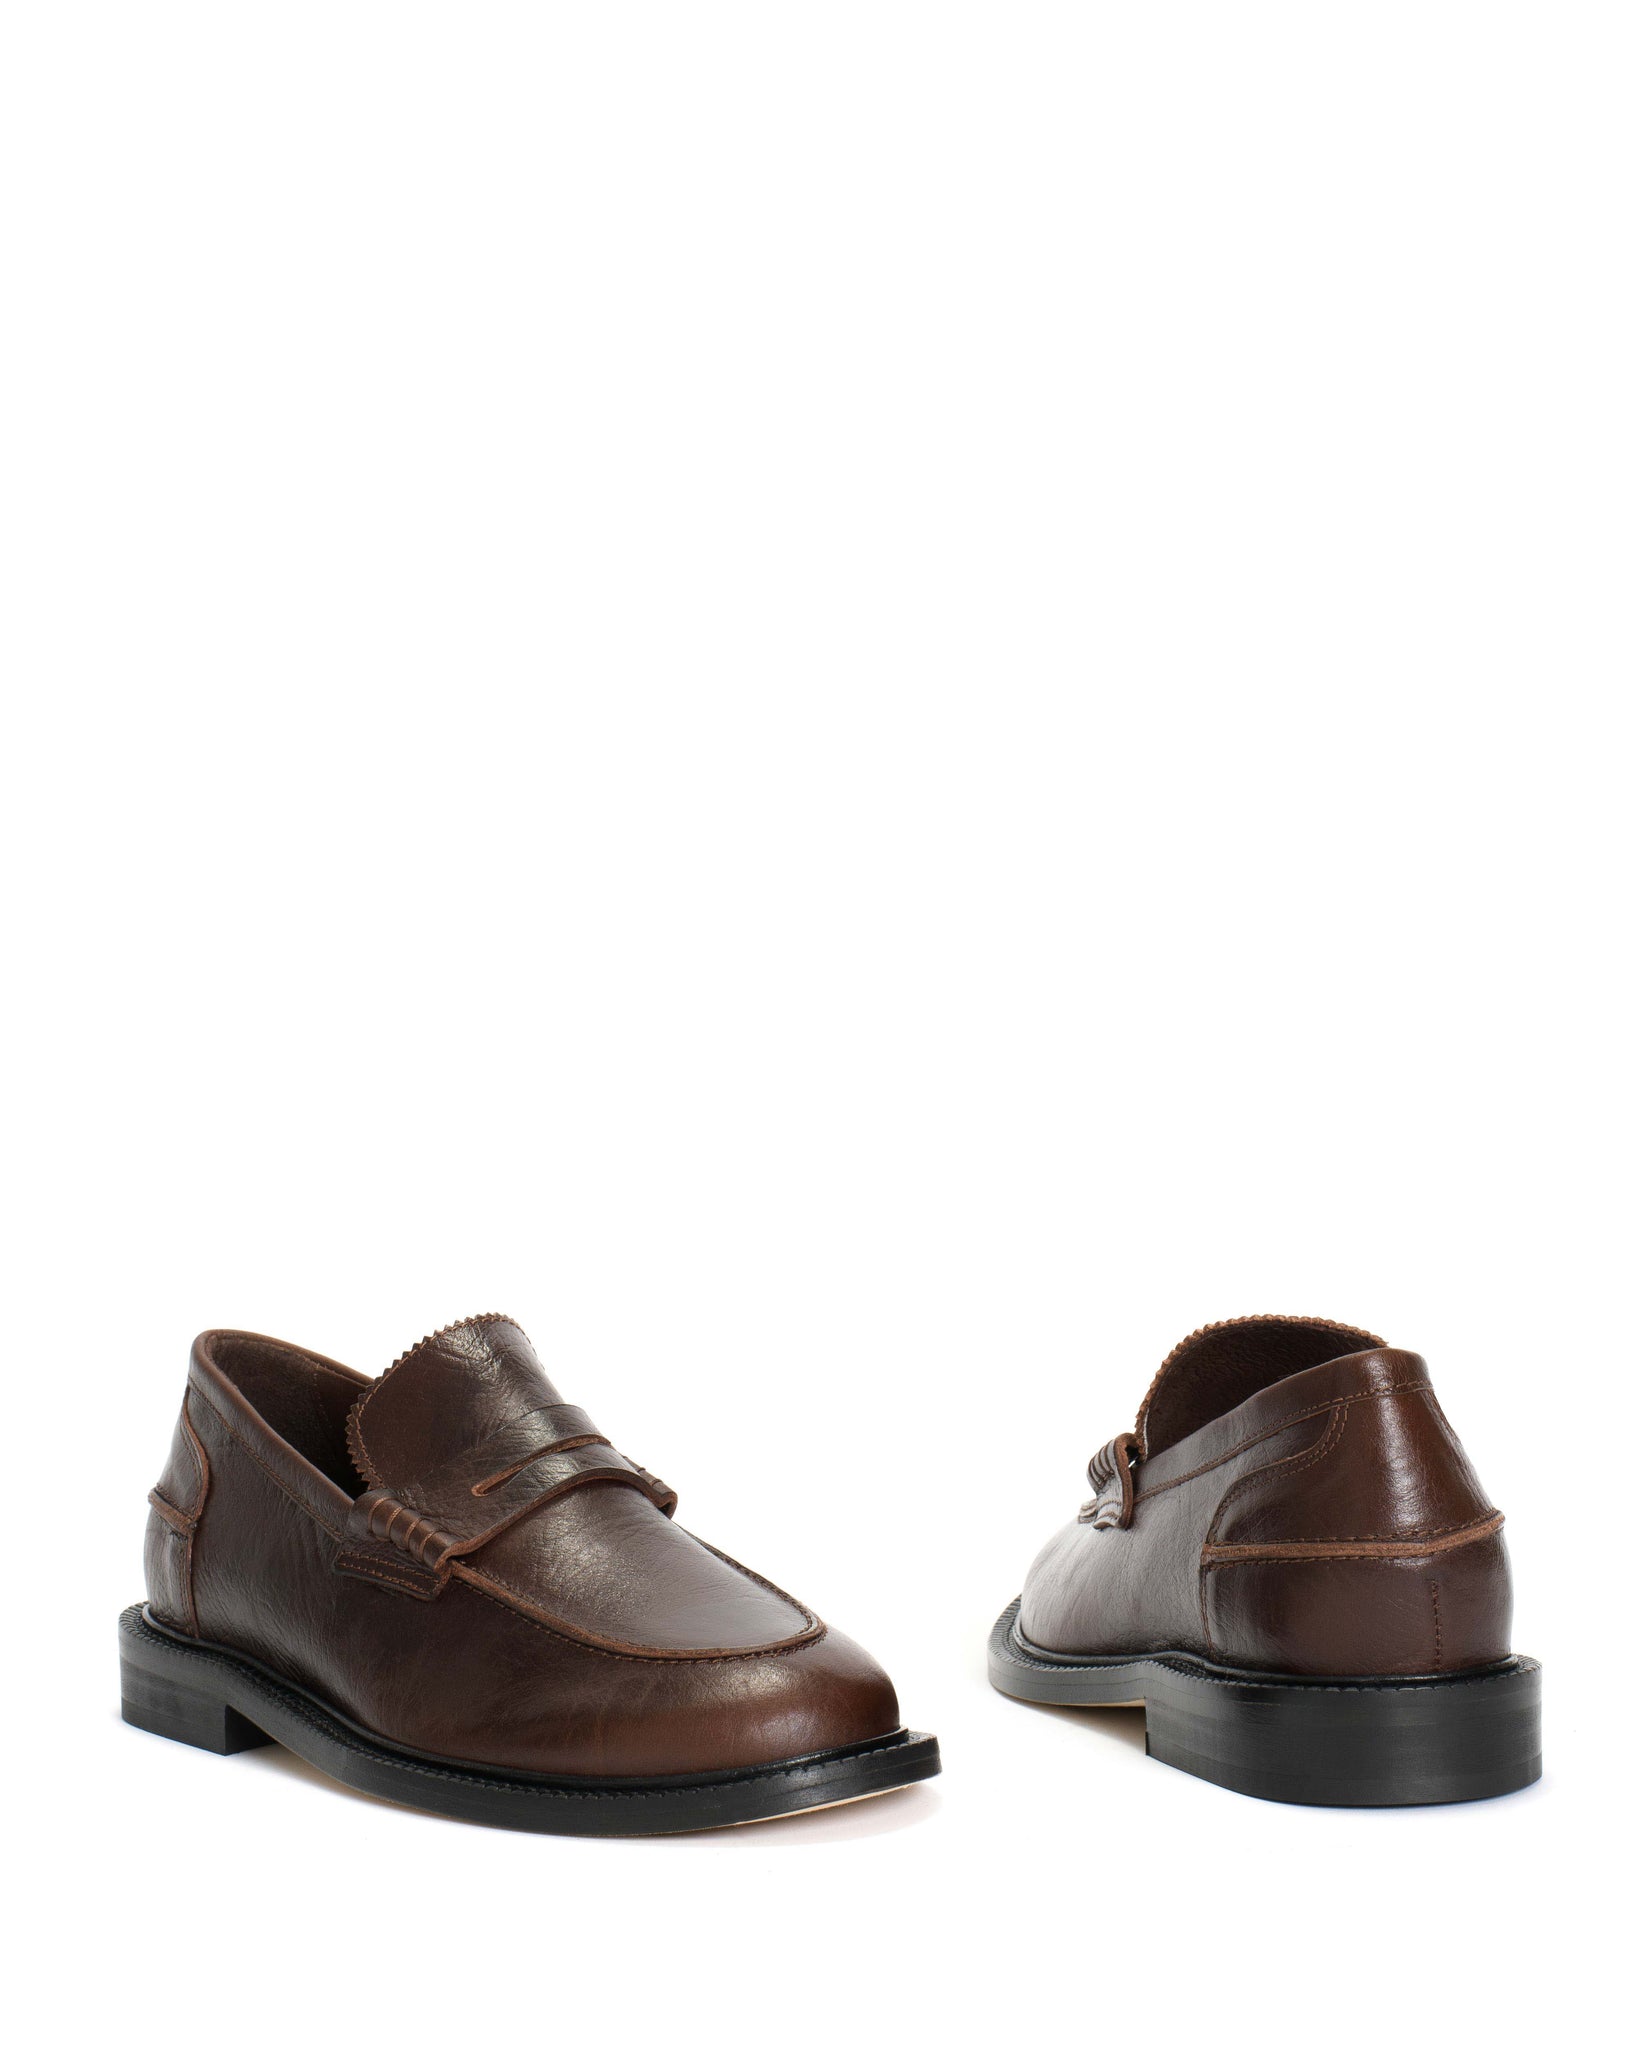 Jeanett Glossy grained vegetable tanned calf Coffee brown - Anonymous Copenhagen